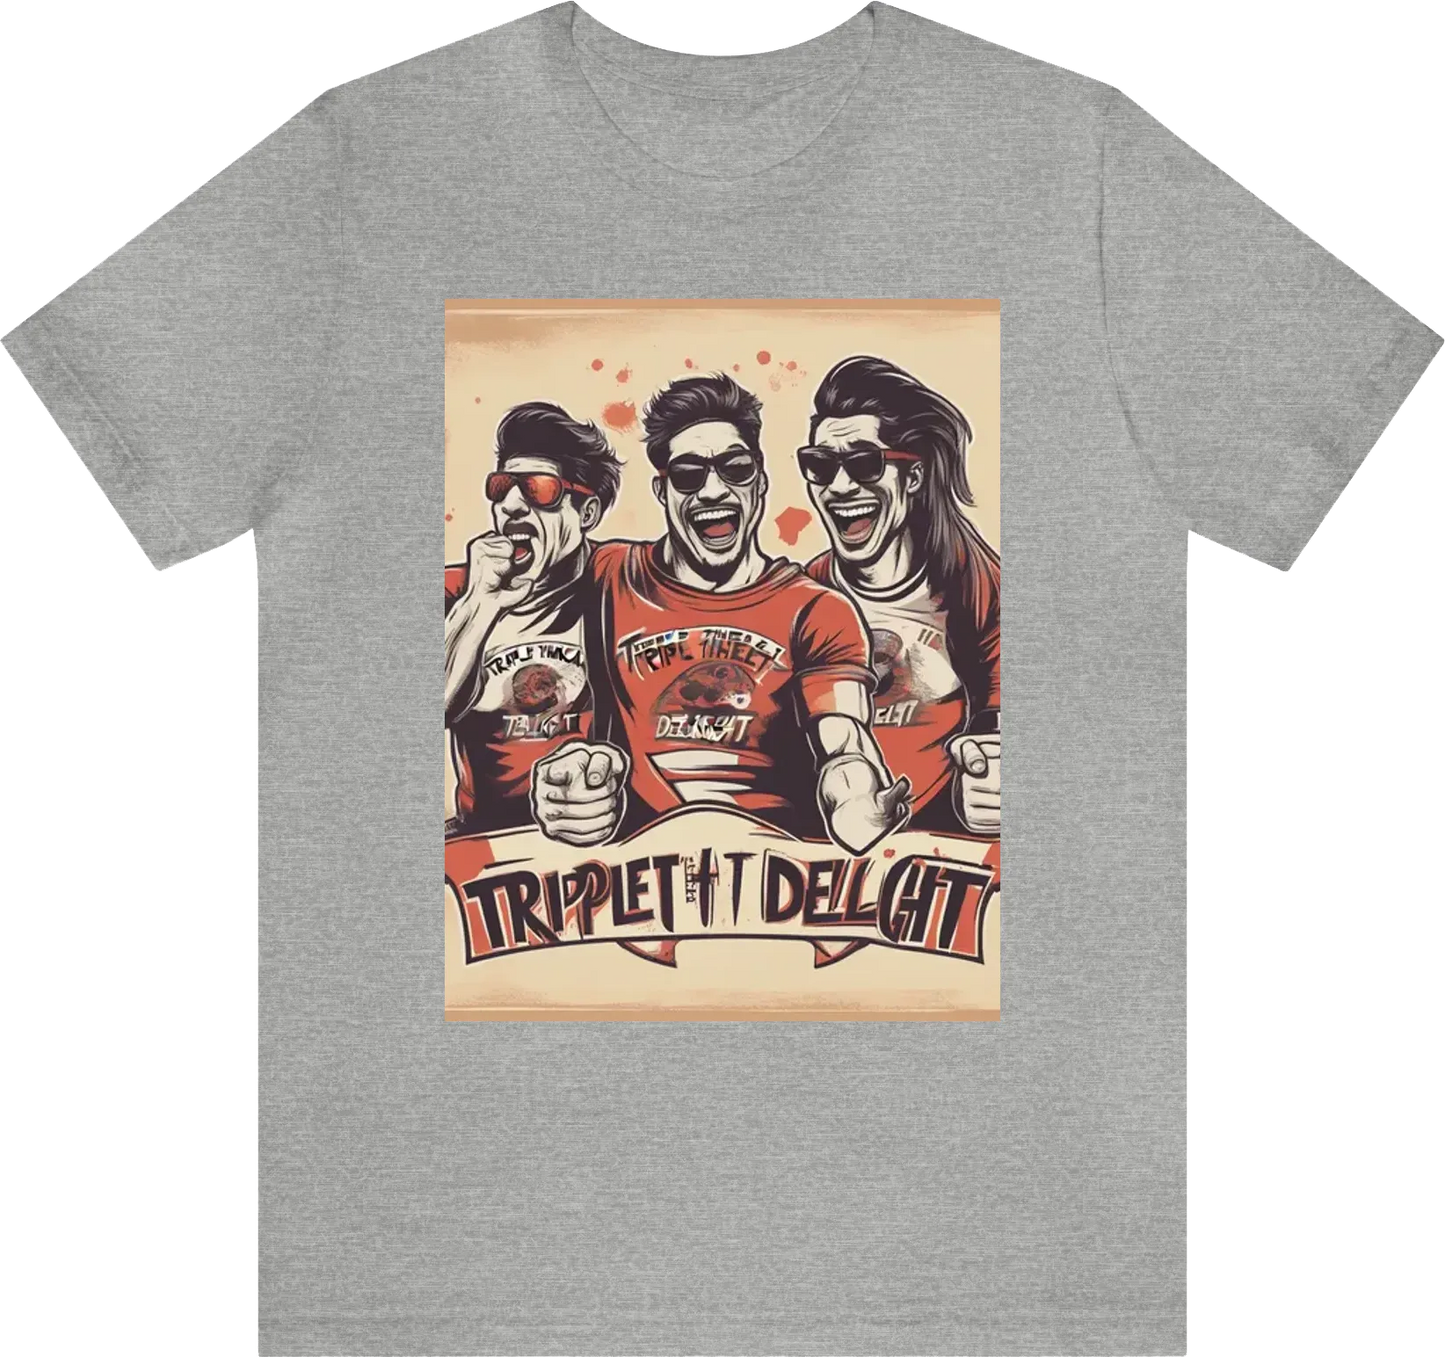 Funny tshirt design with quote: "triple threat. triple delight"